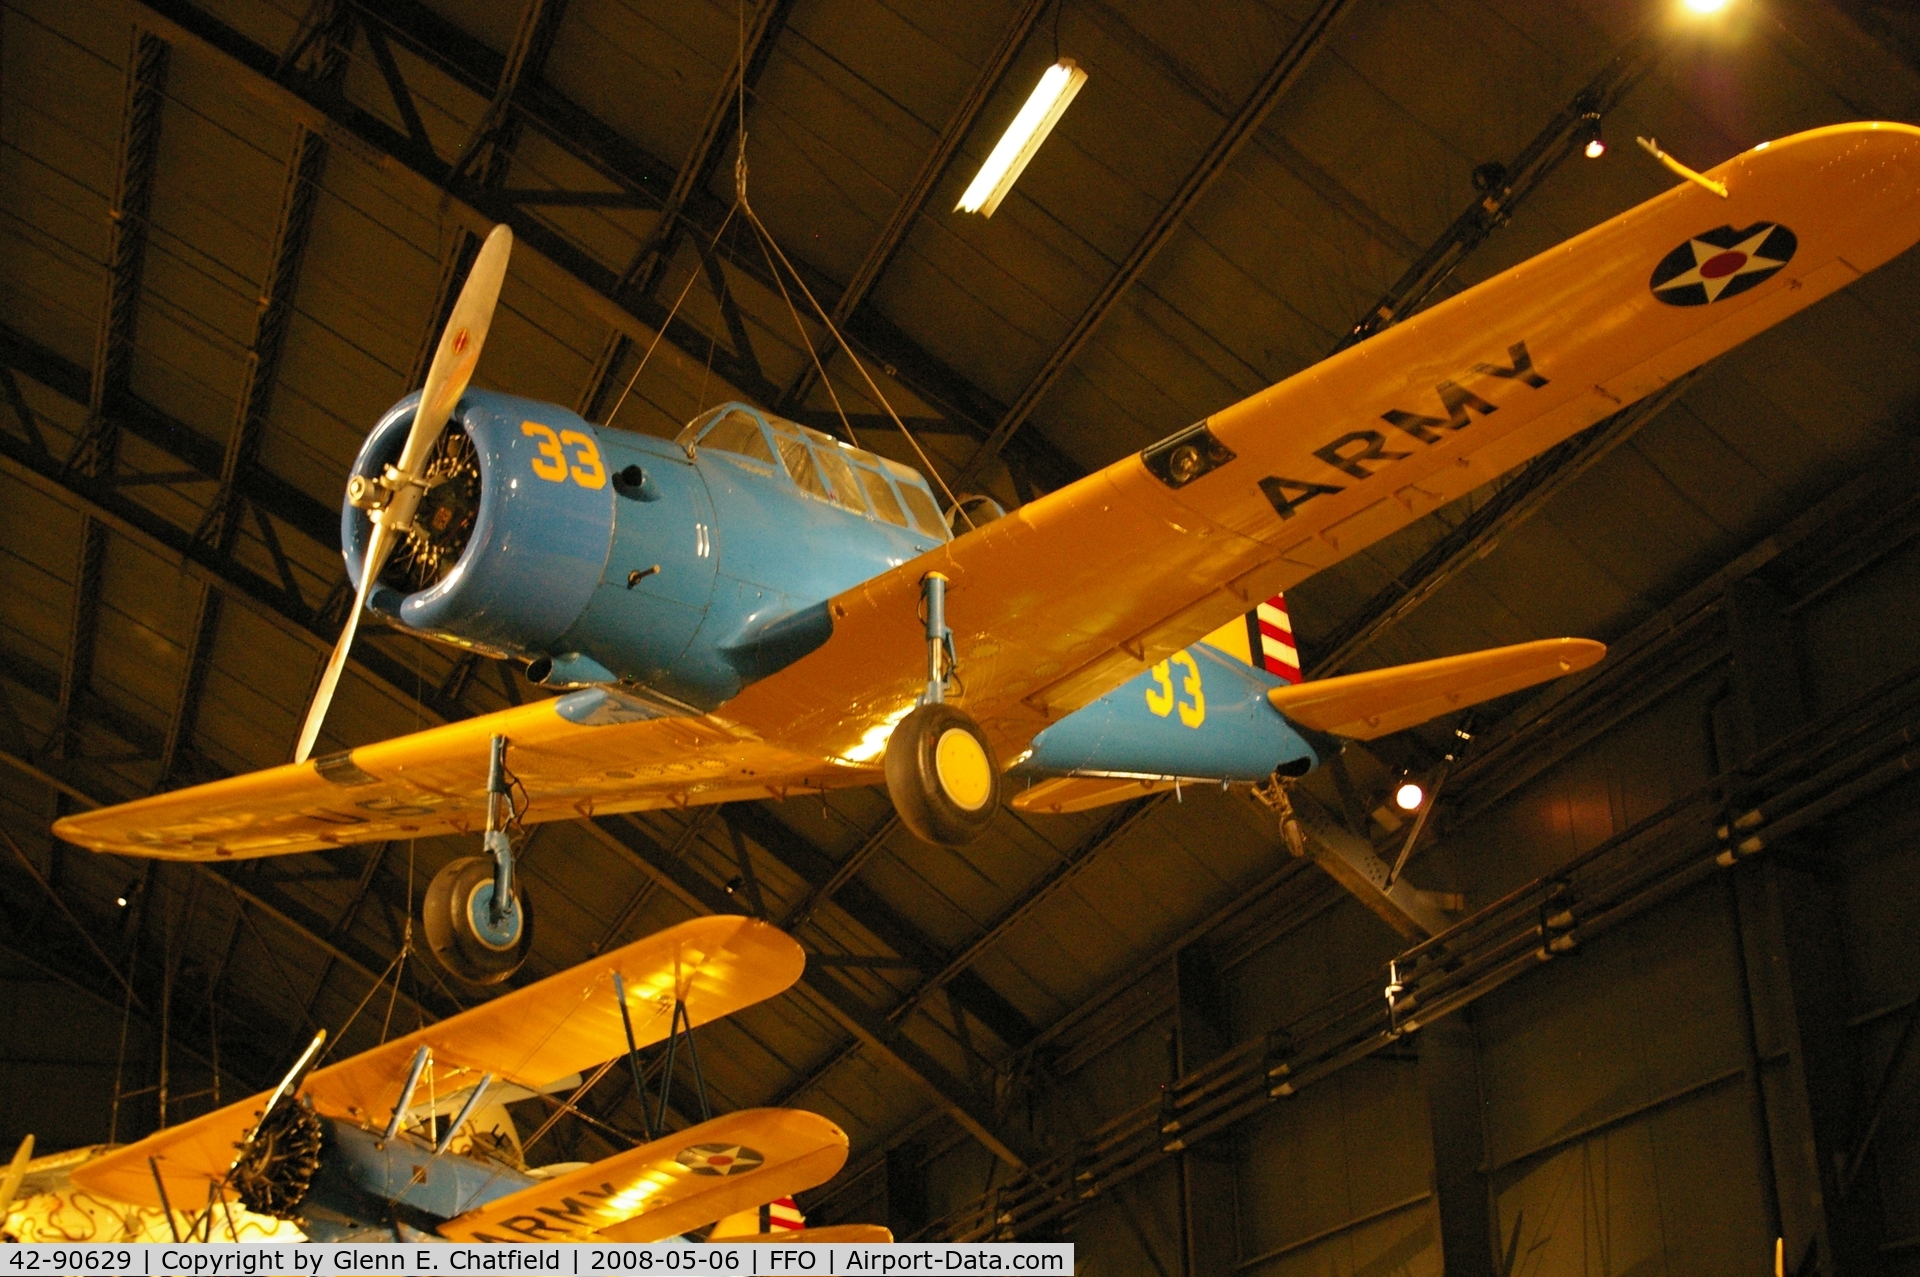 42-90629, 1942 Vultee BT-13B Valiant C/N 79-1706, Hanging from the ceiling in the National Museum of the U.S. Air Force